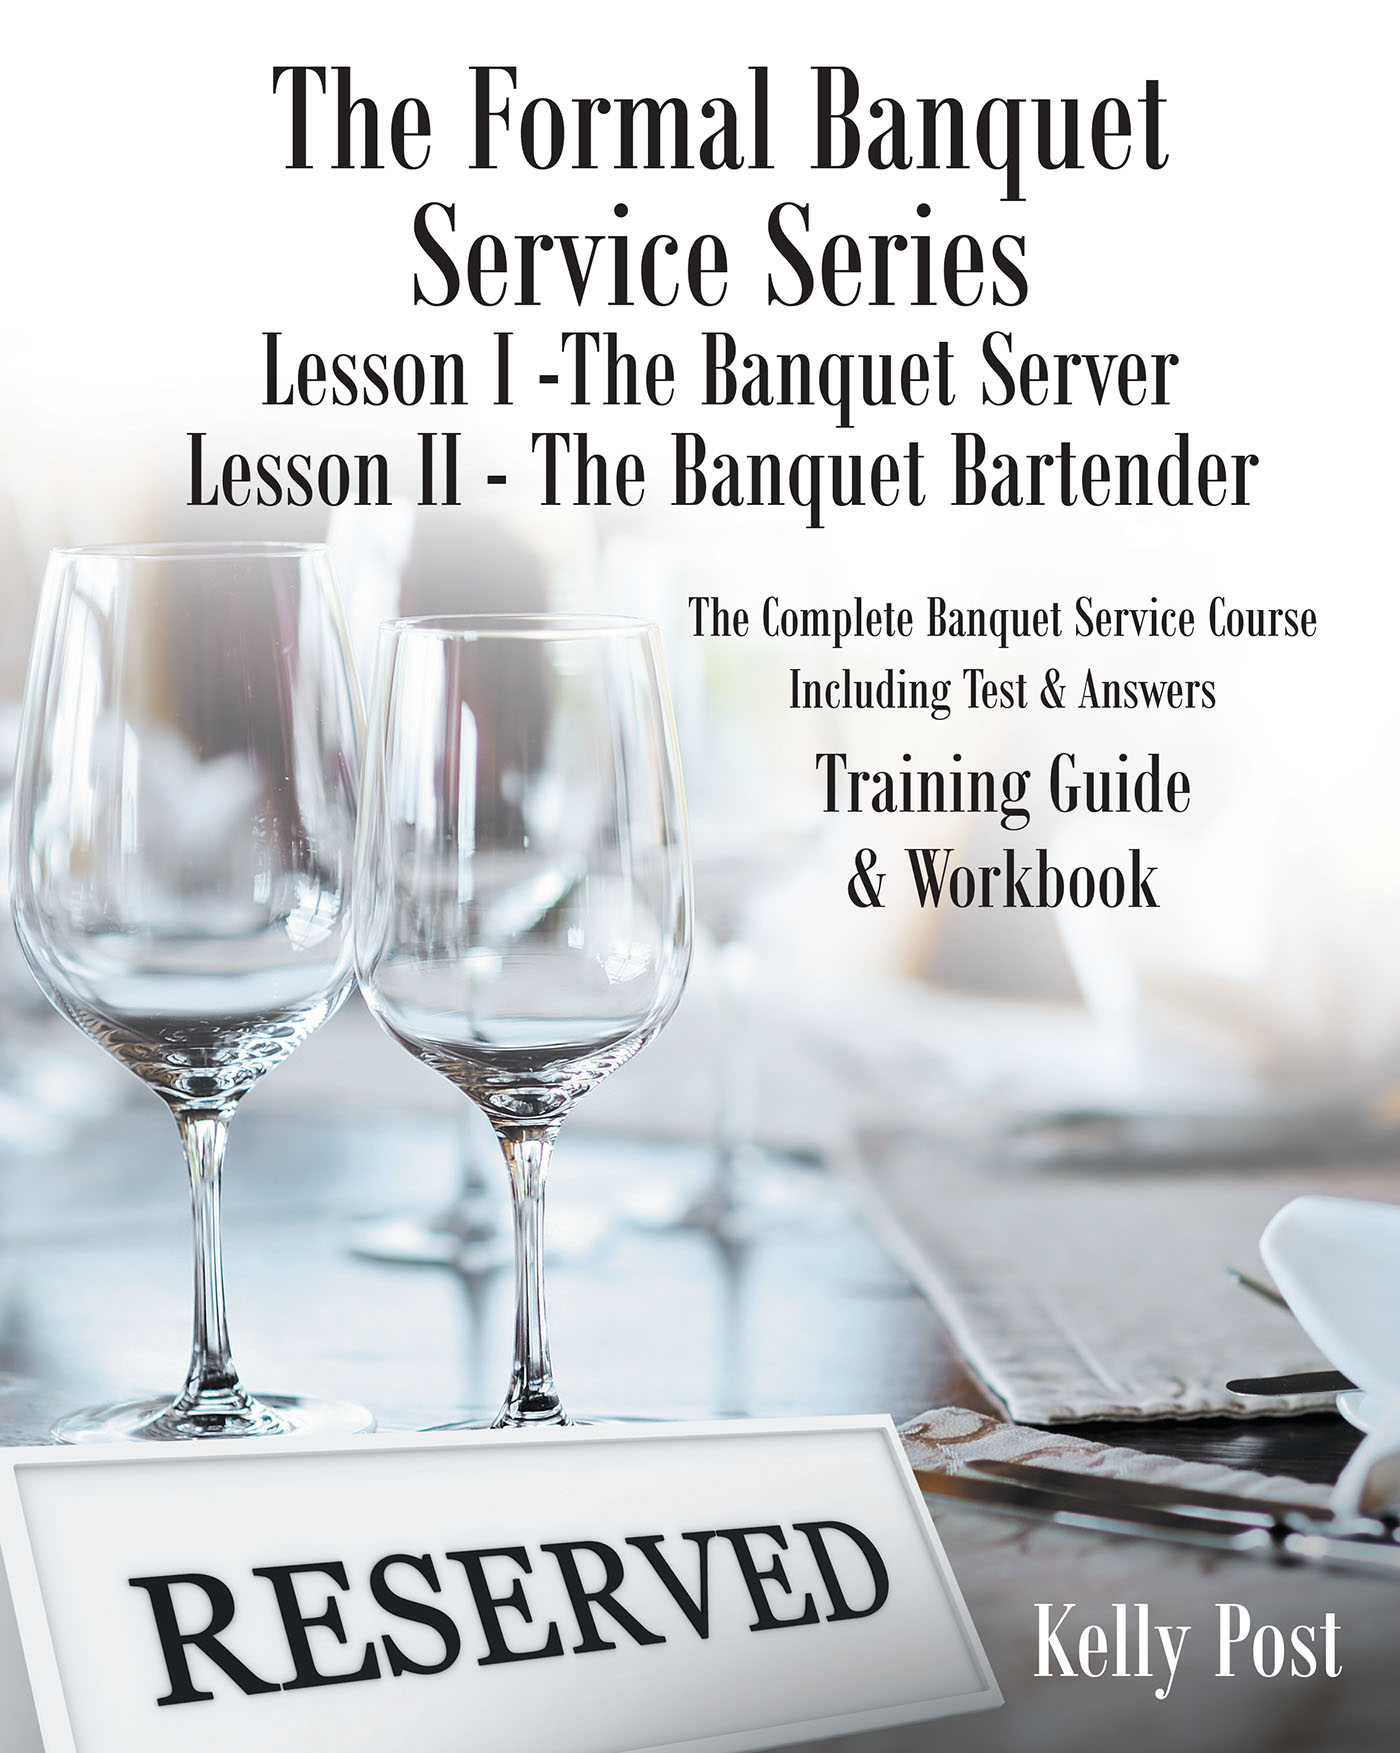 The Formal Banquet Service Series Cover Image